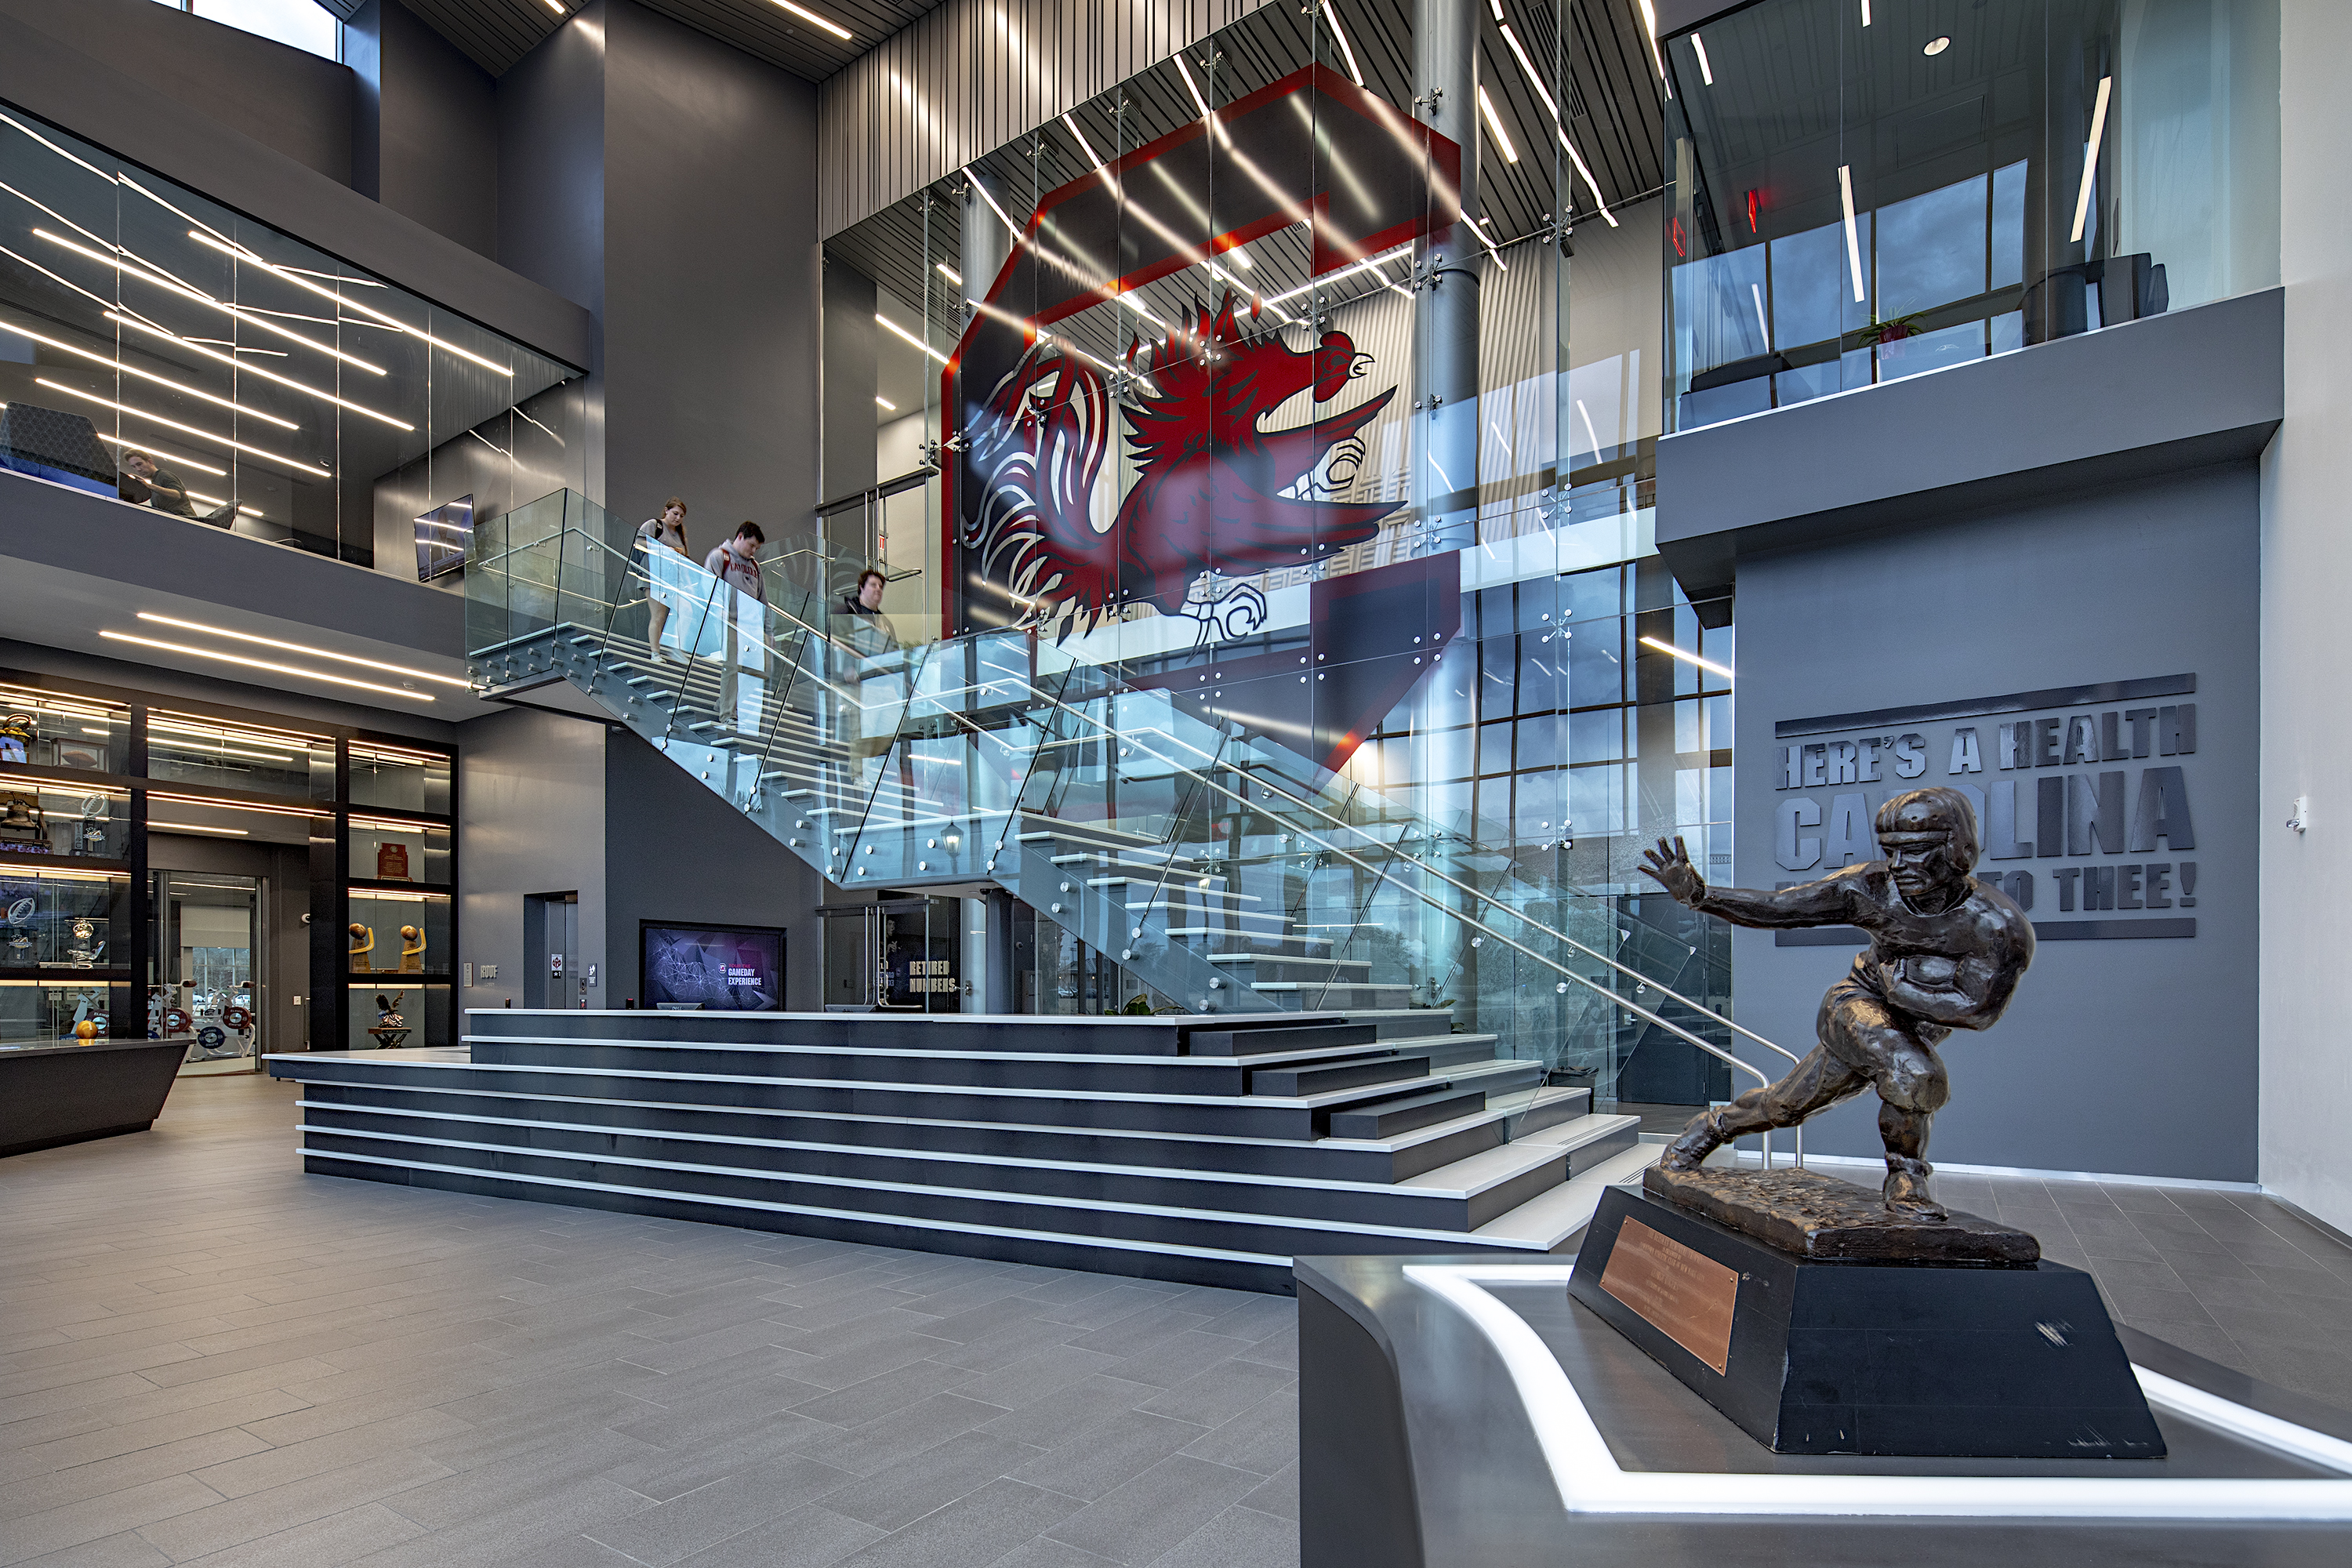 The $50 million Long Family Football Operations Center has 110,000 square 
feet of space to include a recruiting center, locker room, weight room, athletic training room, 
coaches’ offices, meeting rooms, dining room, and a players’ lounge. The new facility is the crown jewel of Gamecock football. 
George Rogers’ Heisman Trophy welcomes every athlete and visitor into the lobby.